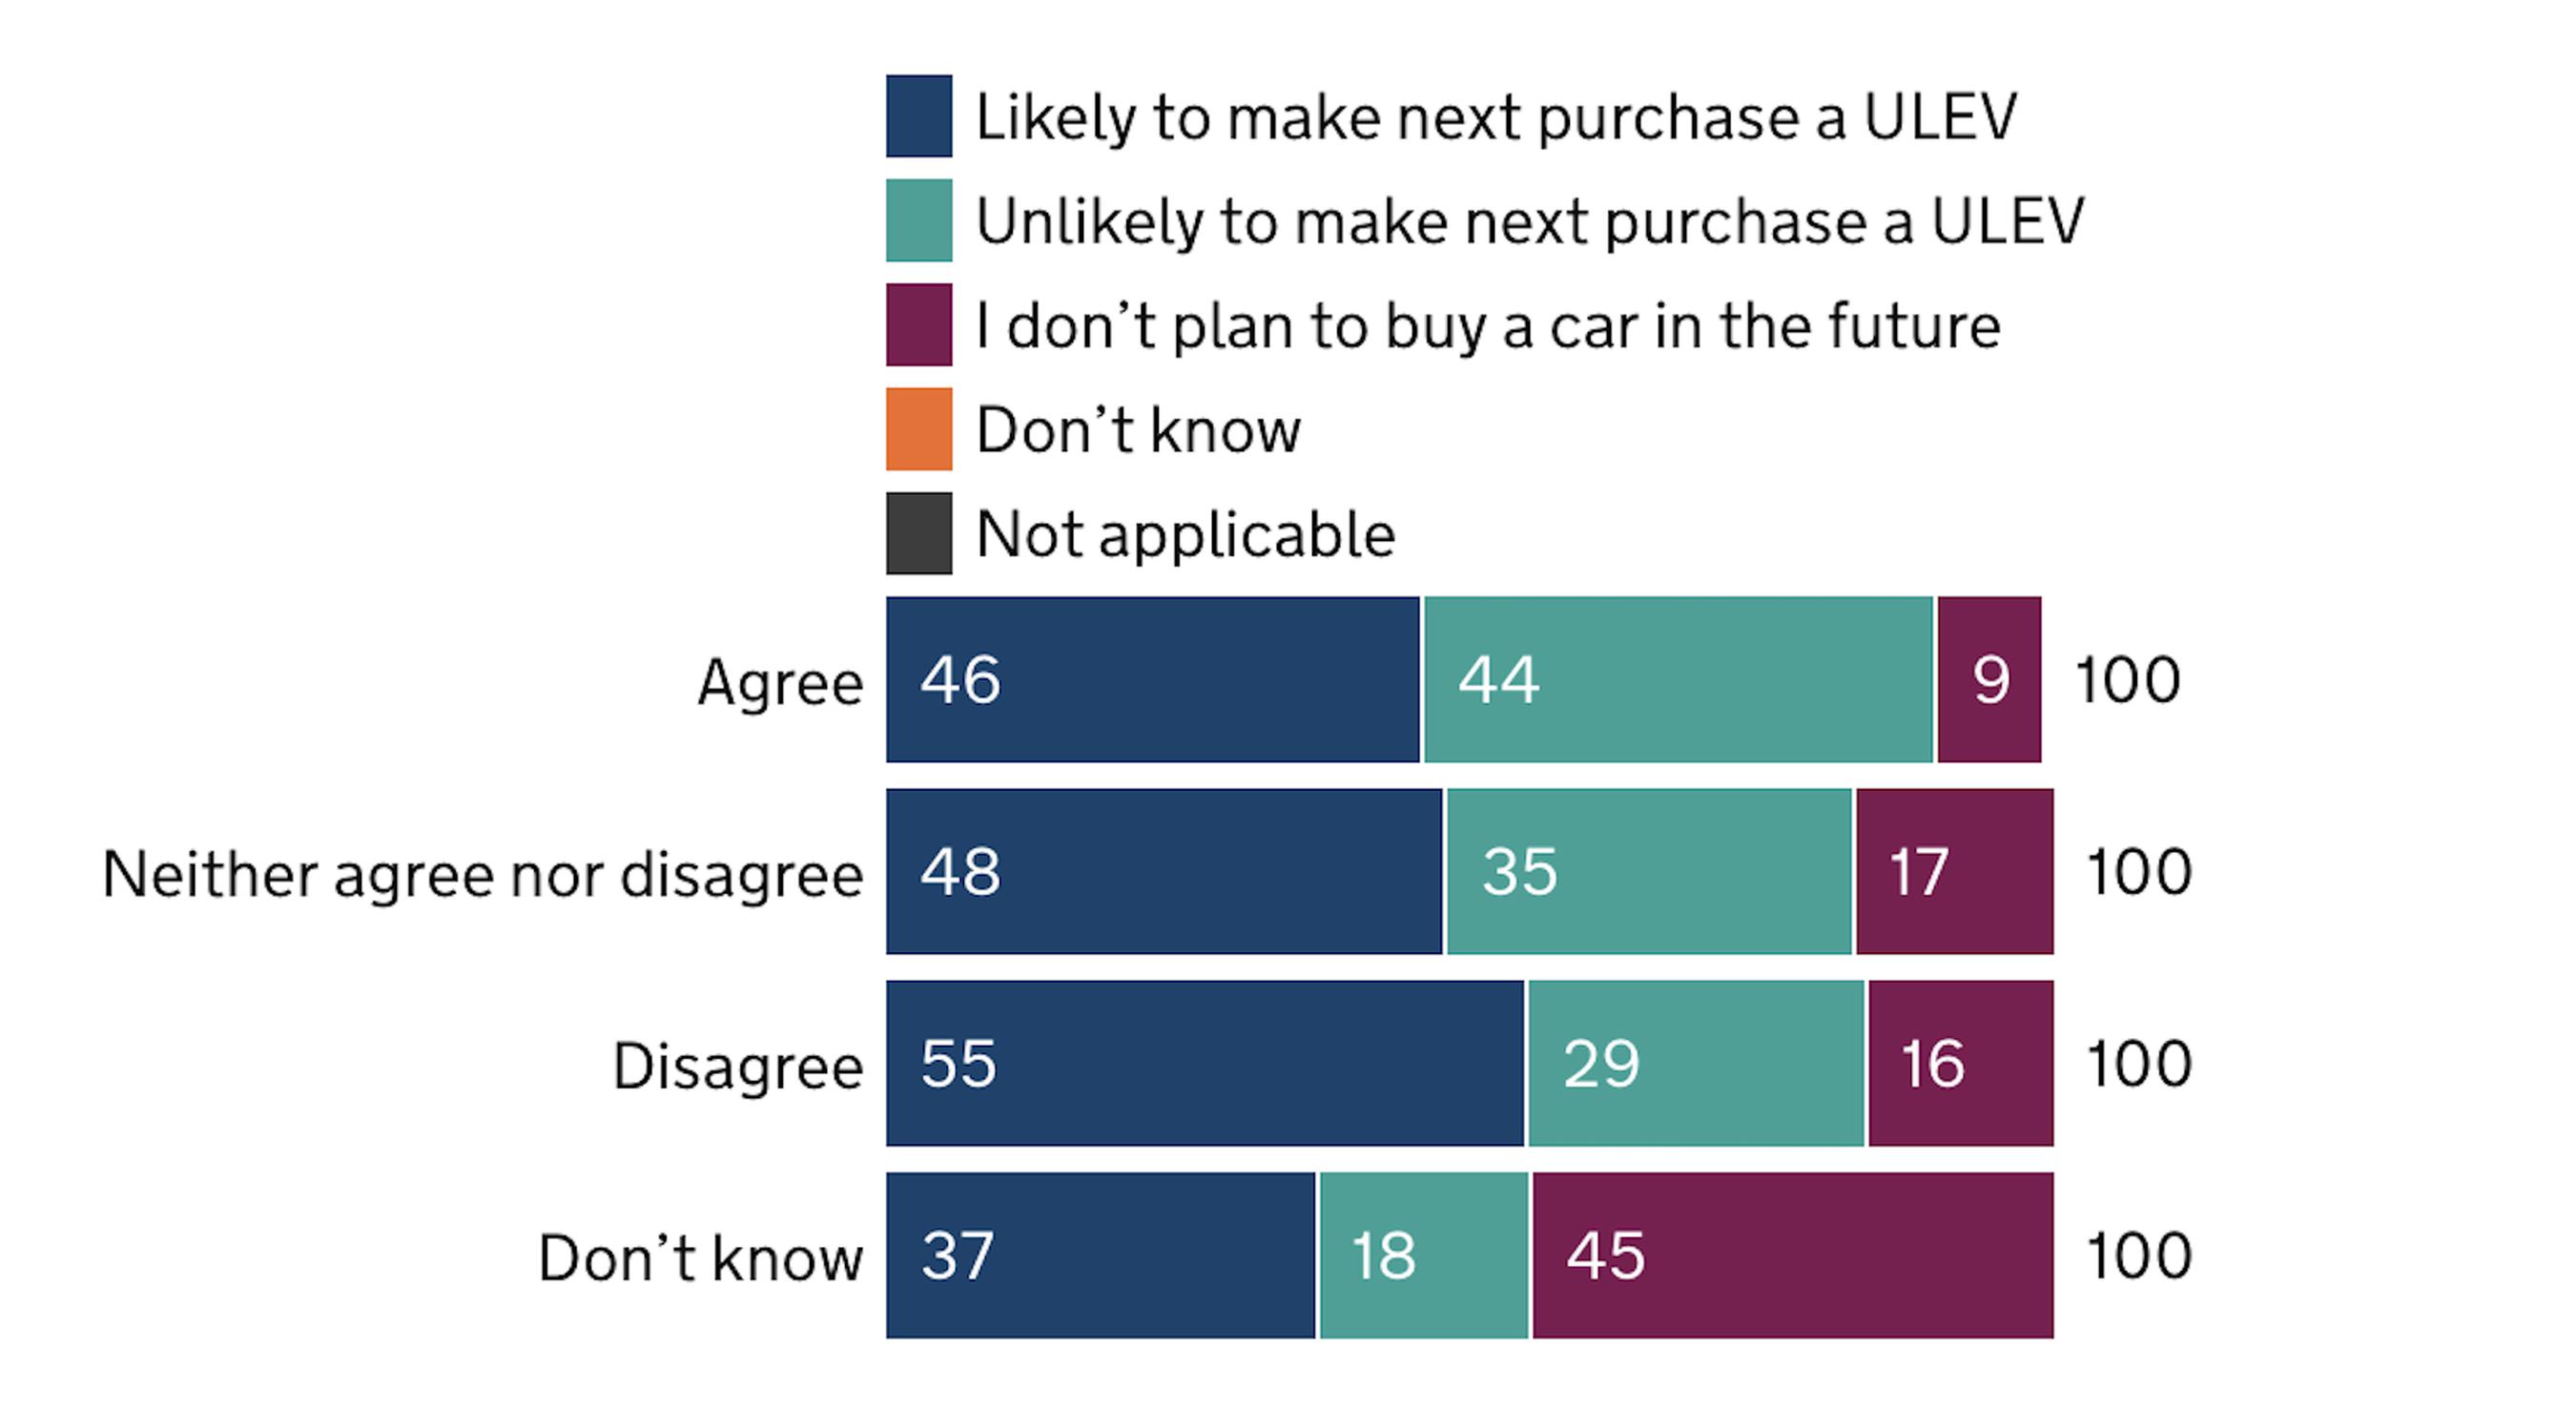 Likelihood of purchaing an ULEV as next car, based on attitude of queues at public chargepoint (NATS Wave 9 2023)